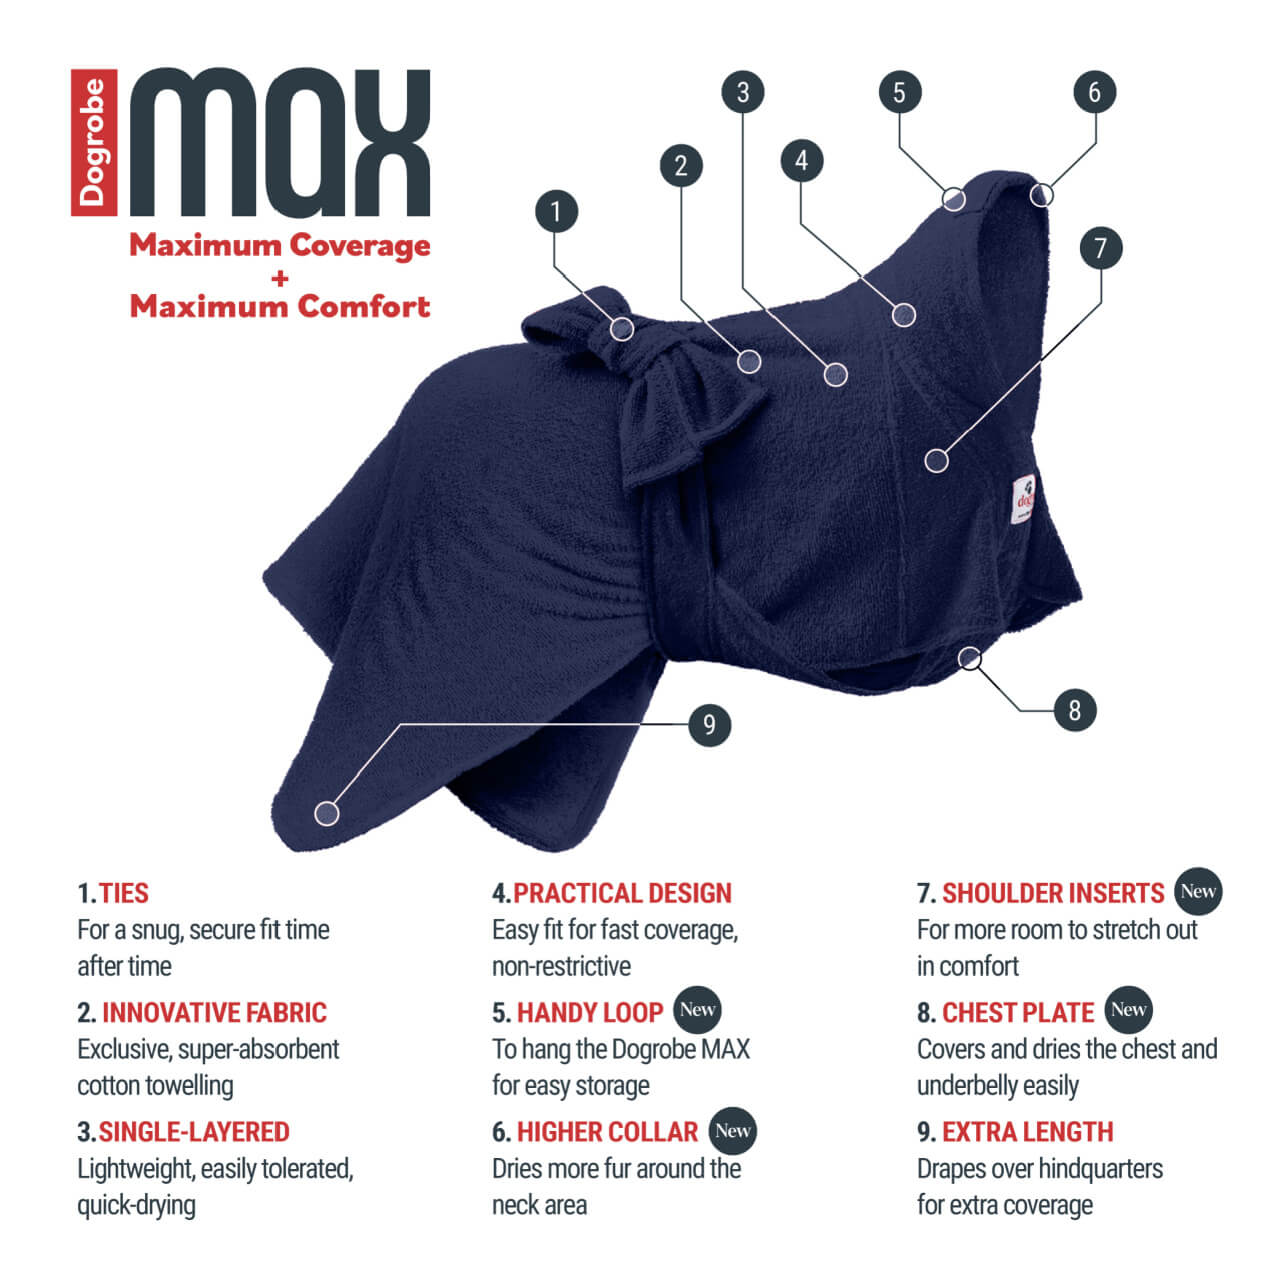 Navy dog robe, the Dogrobe MAX: chest plate and higher collar for maximum coverage and shoulder inserts for maximum comfort.